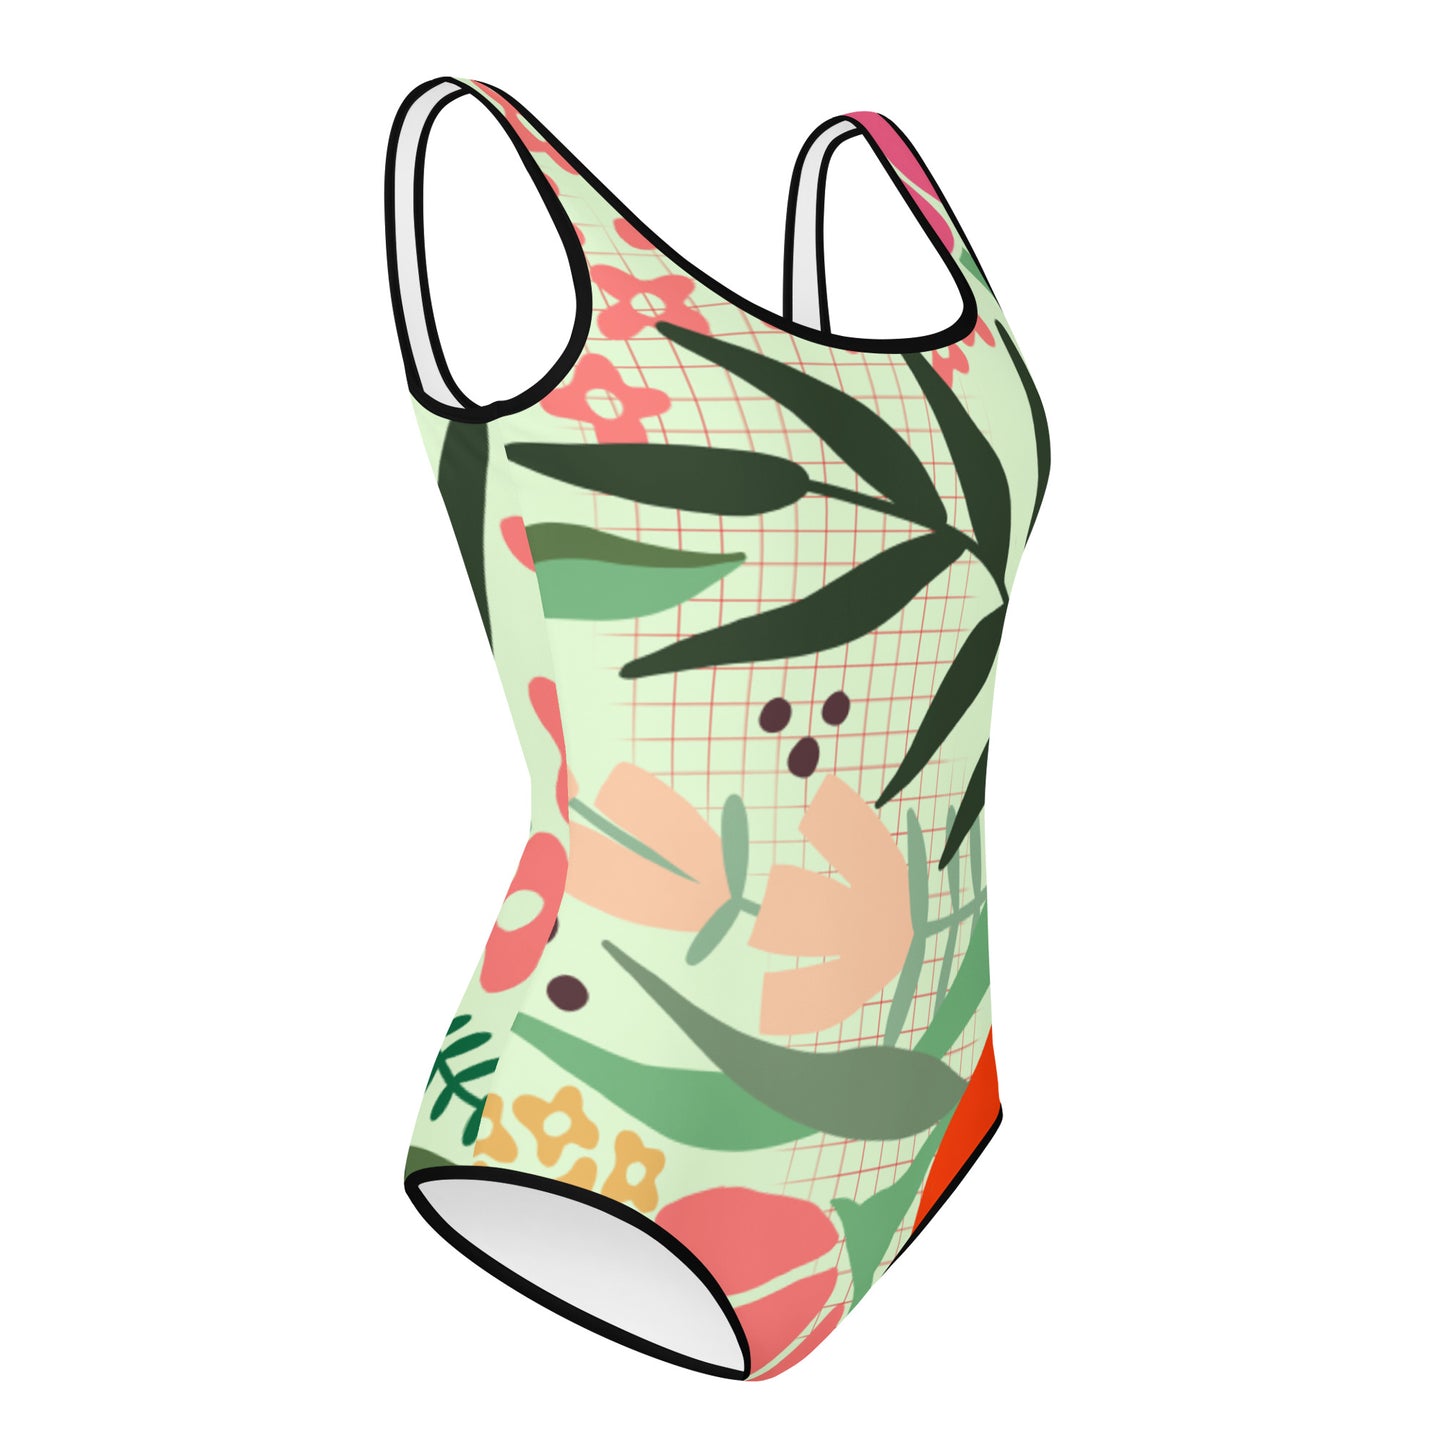 Flor Youth Swimsuit by Baked Fresca